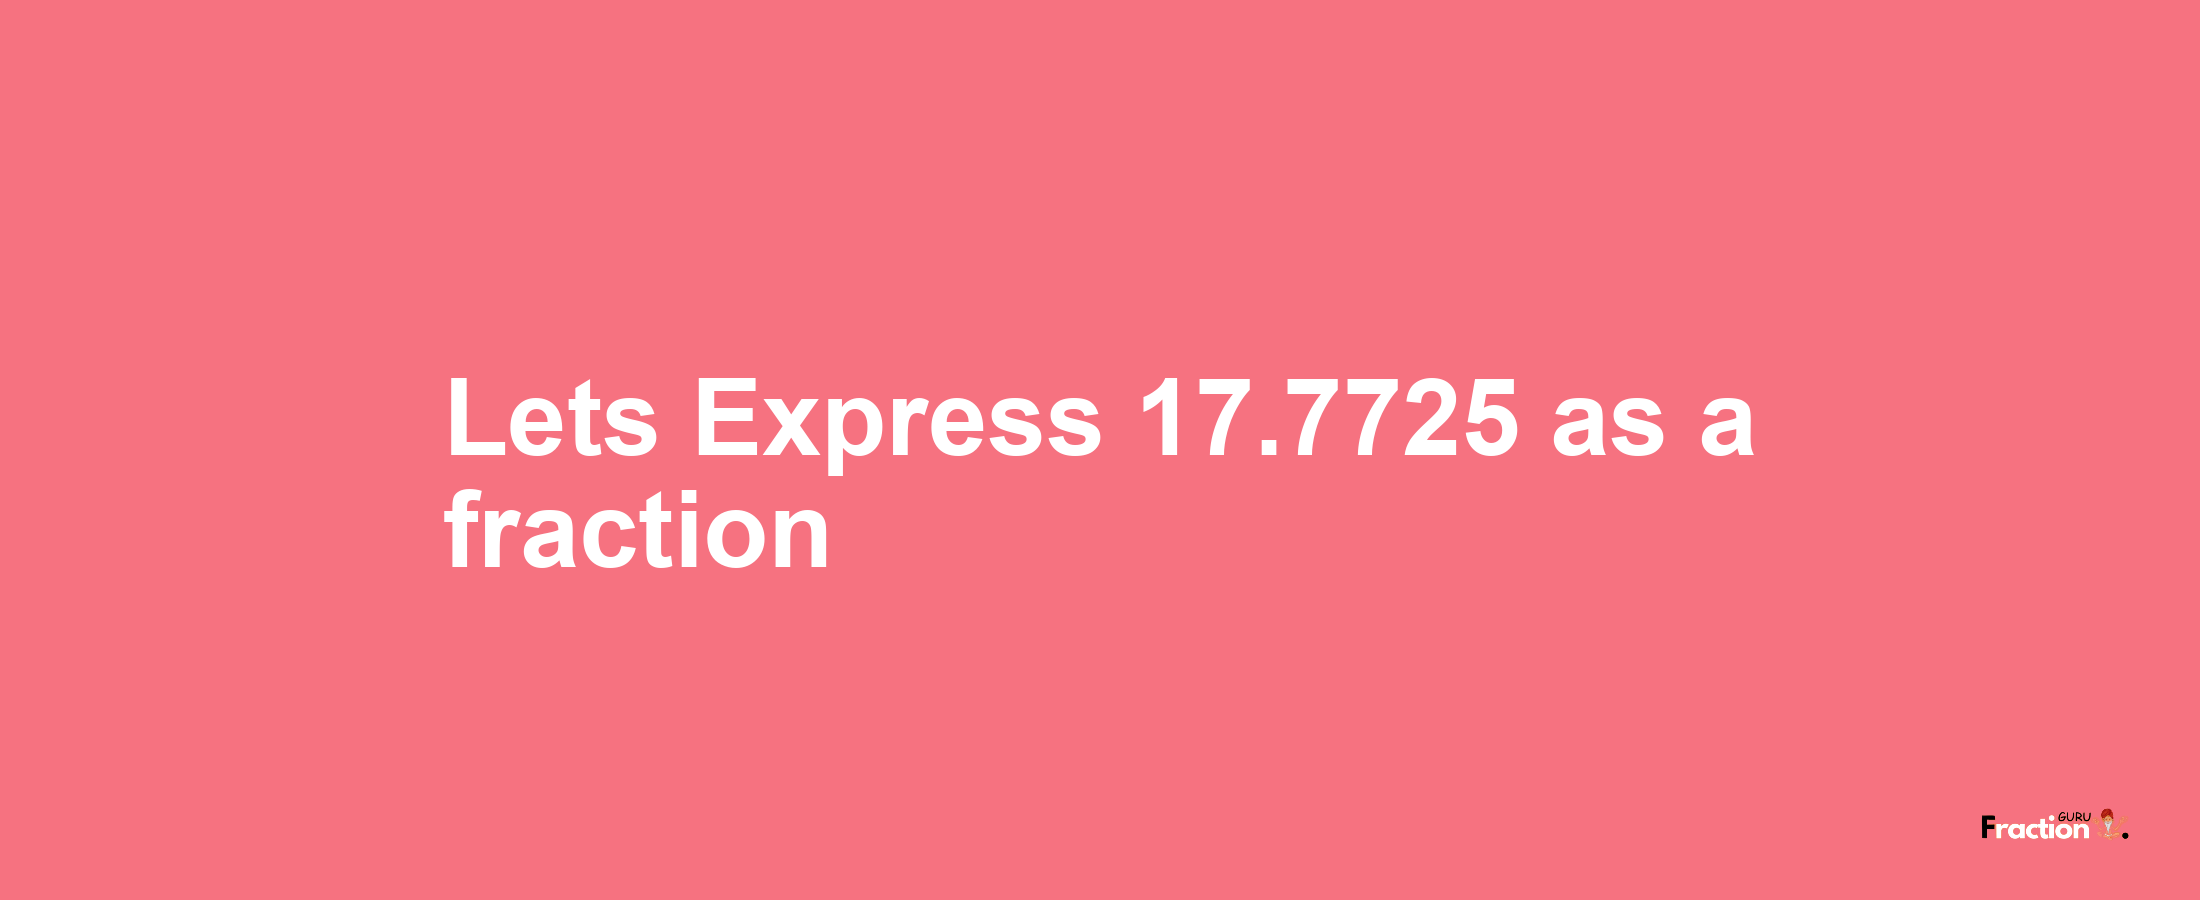 Lets Express 17.7725 as afraction